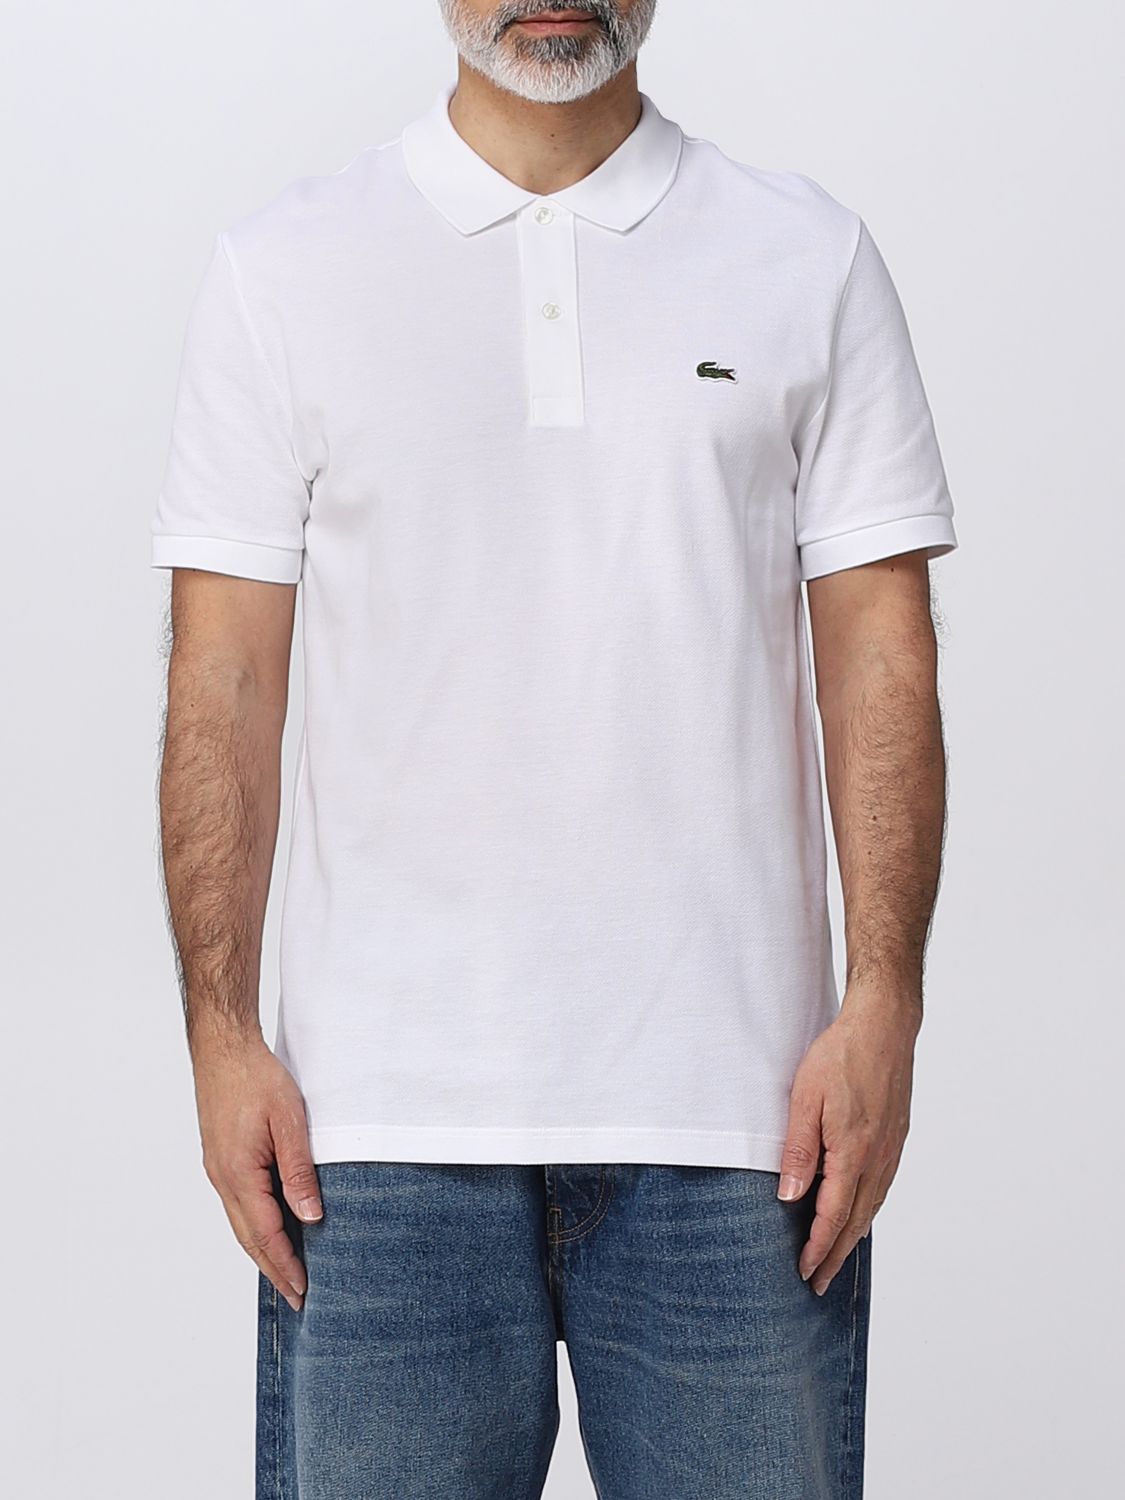 LACOSTE: shirt for man - White | Lacoste polo PH4012 on